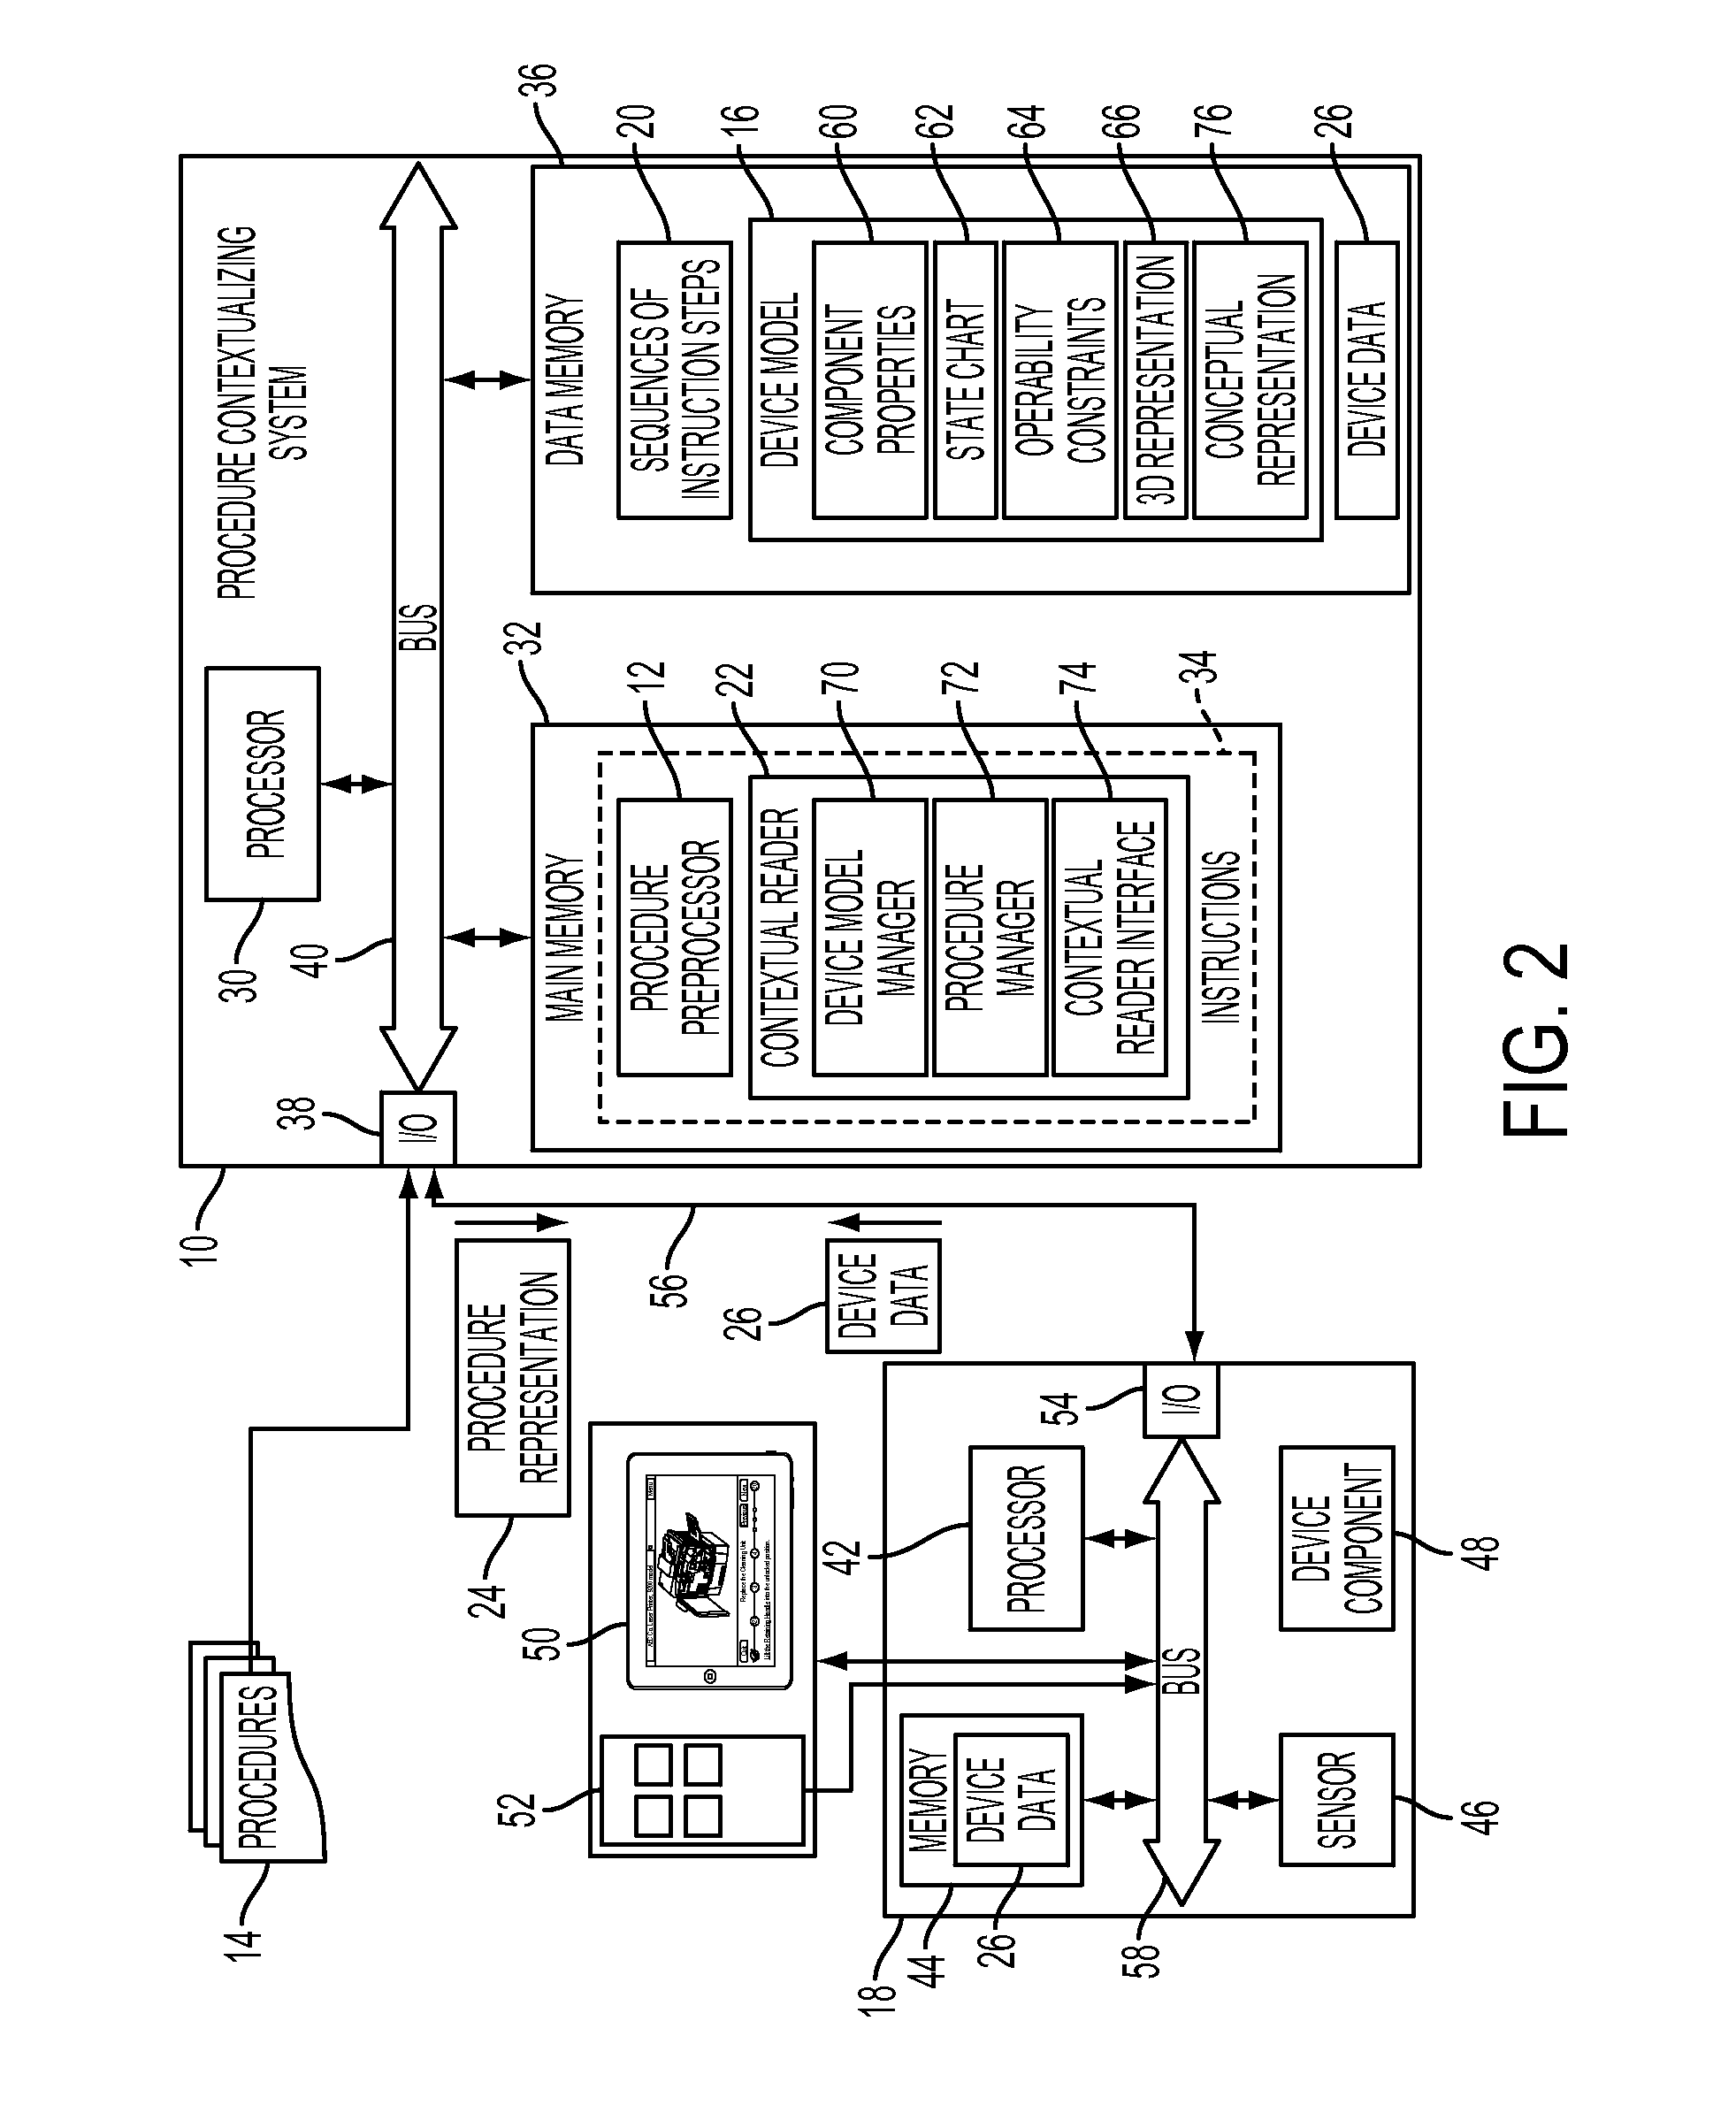 System and method for contextualizing device operating procedures